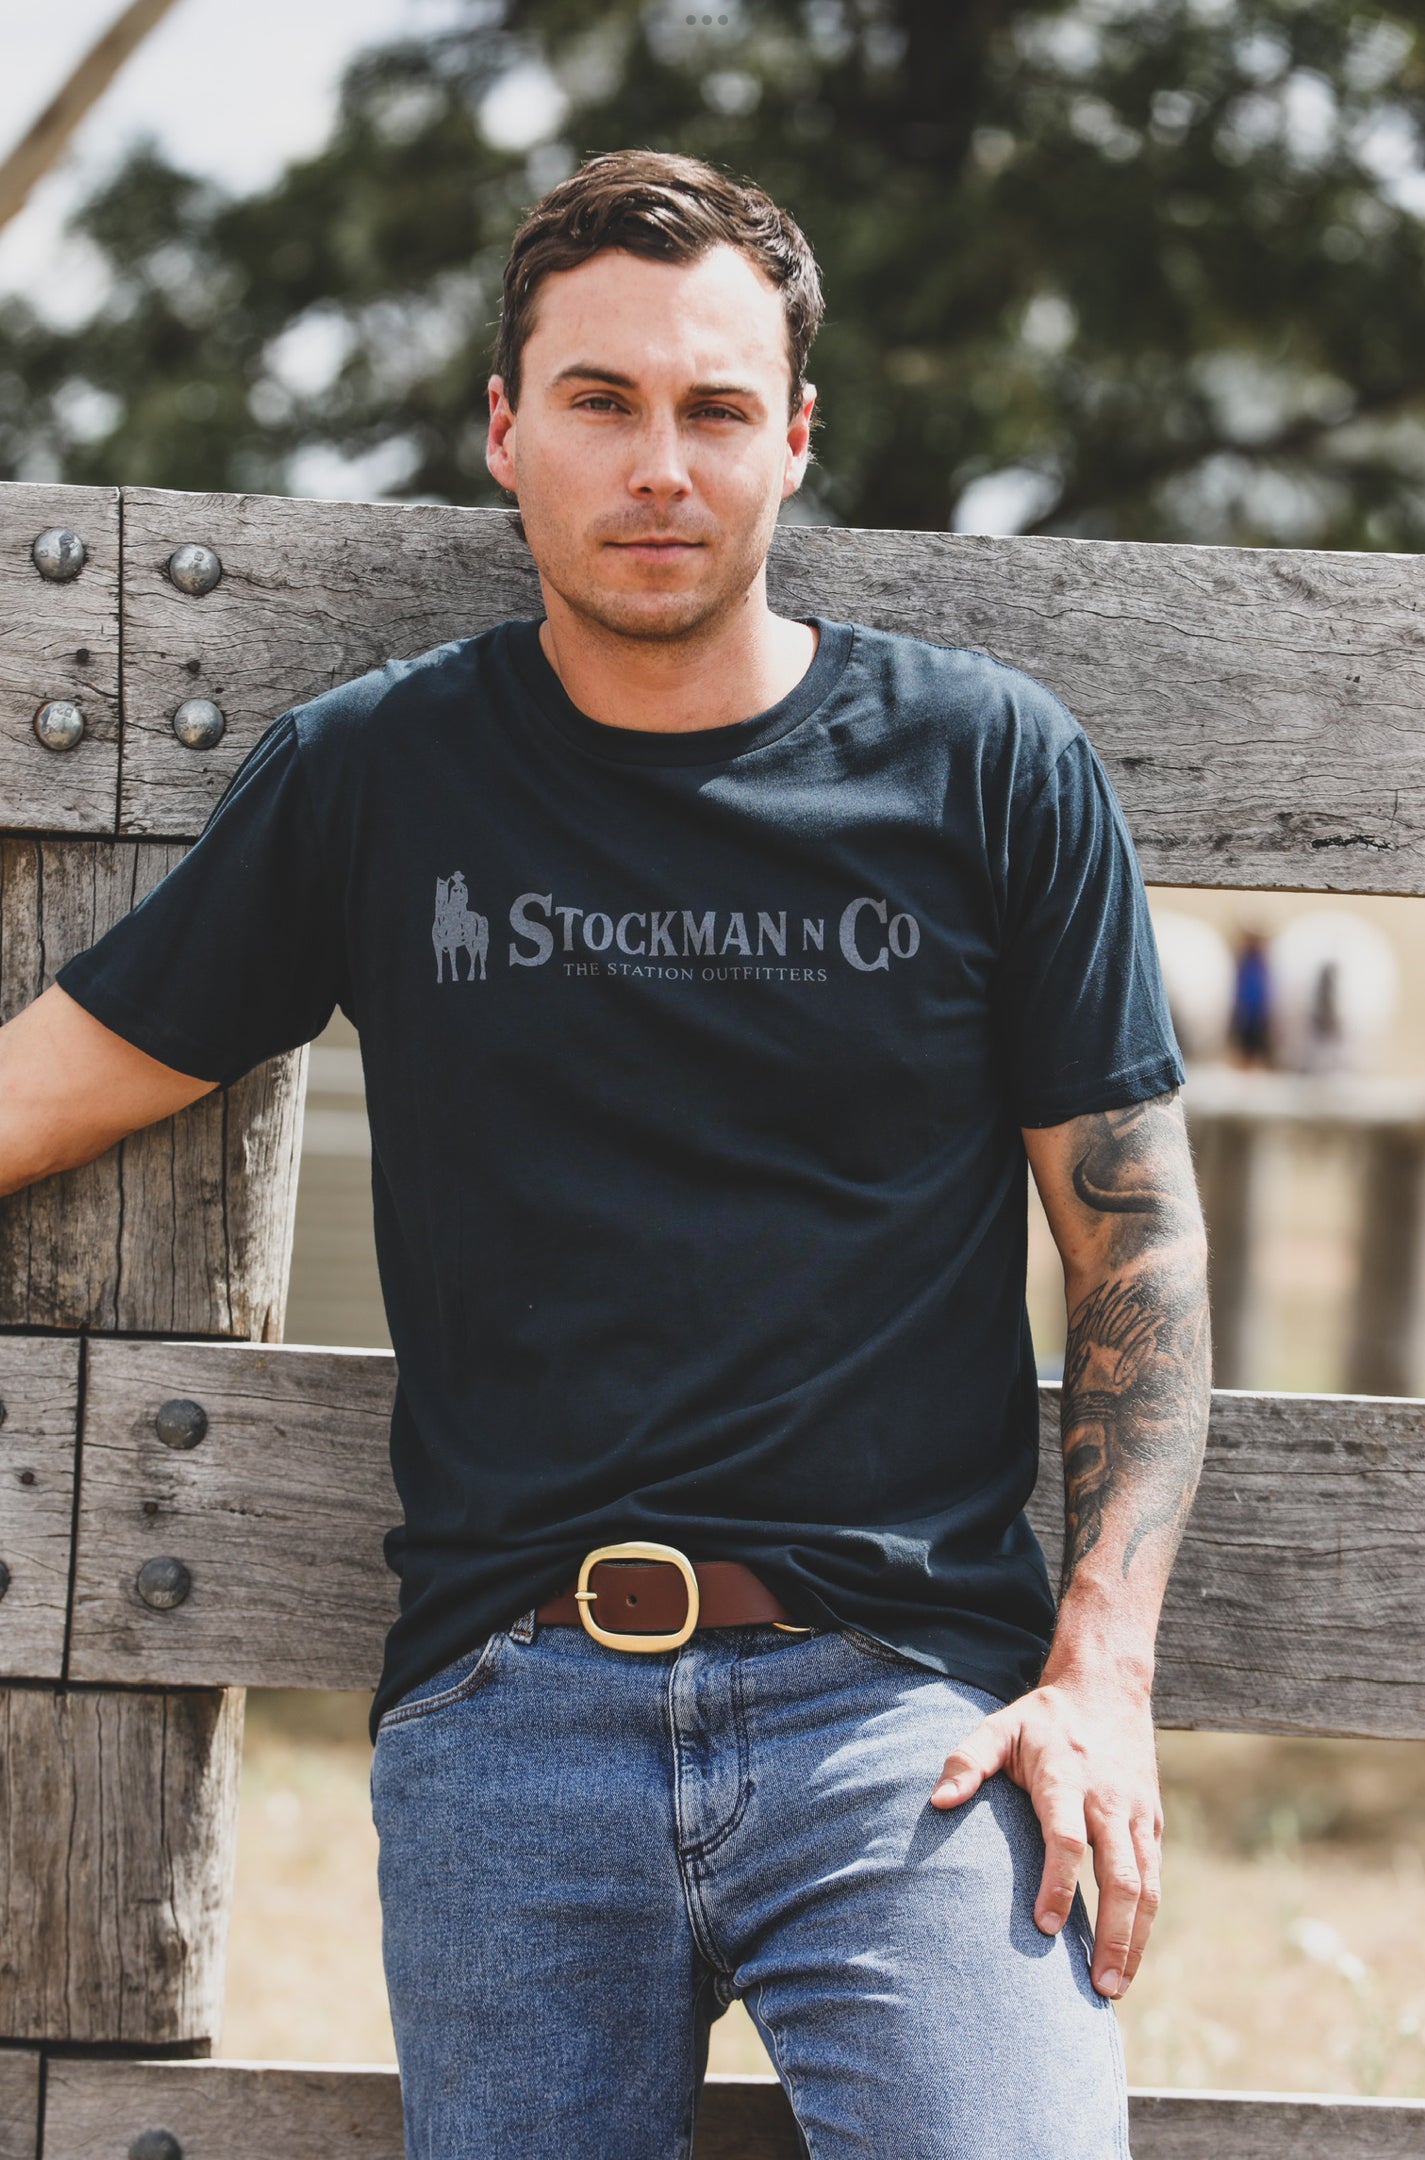 Men’s Station Tee - STOCKMAN N CO